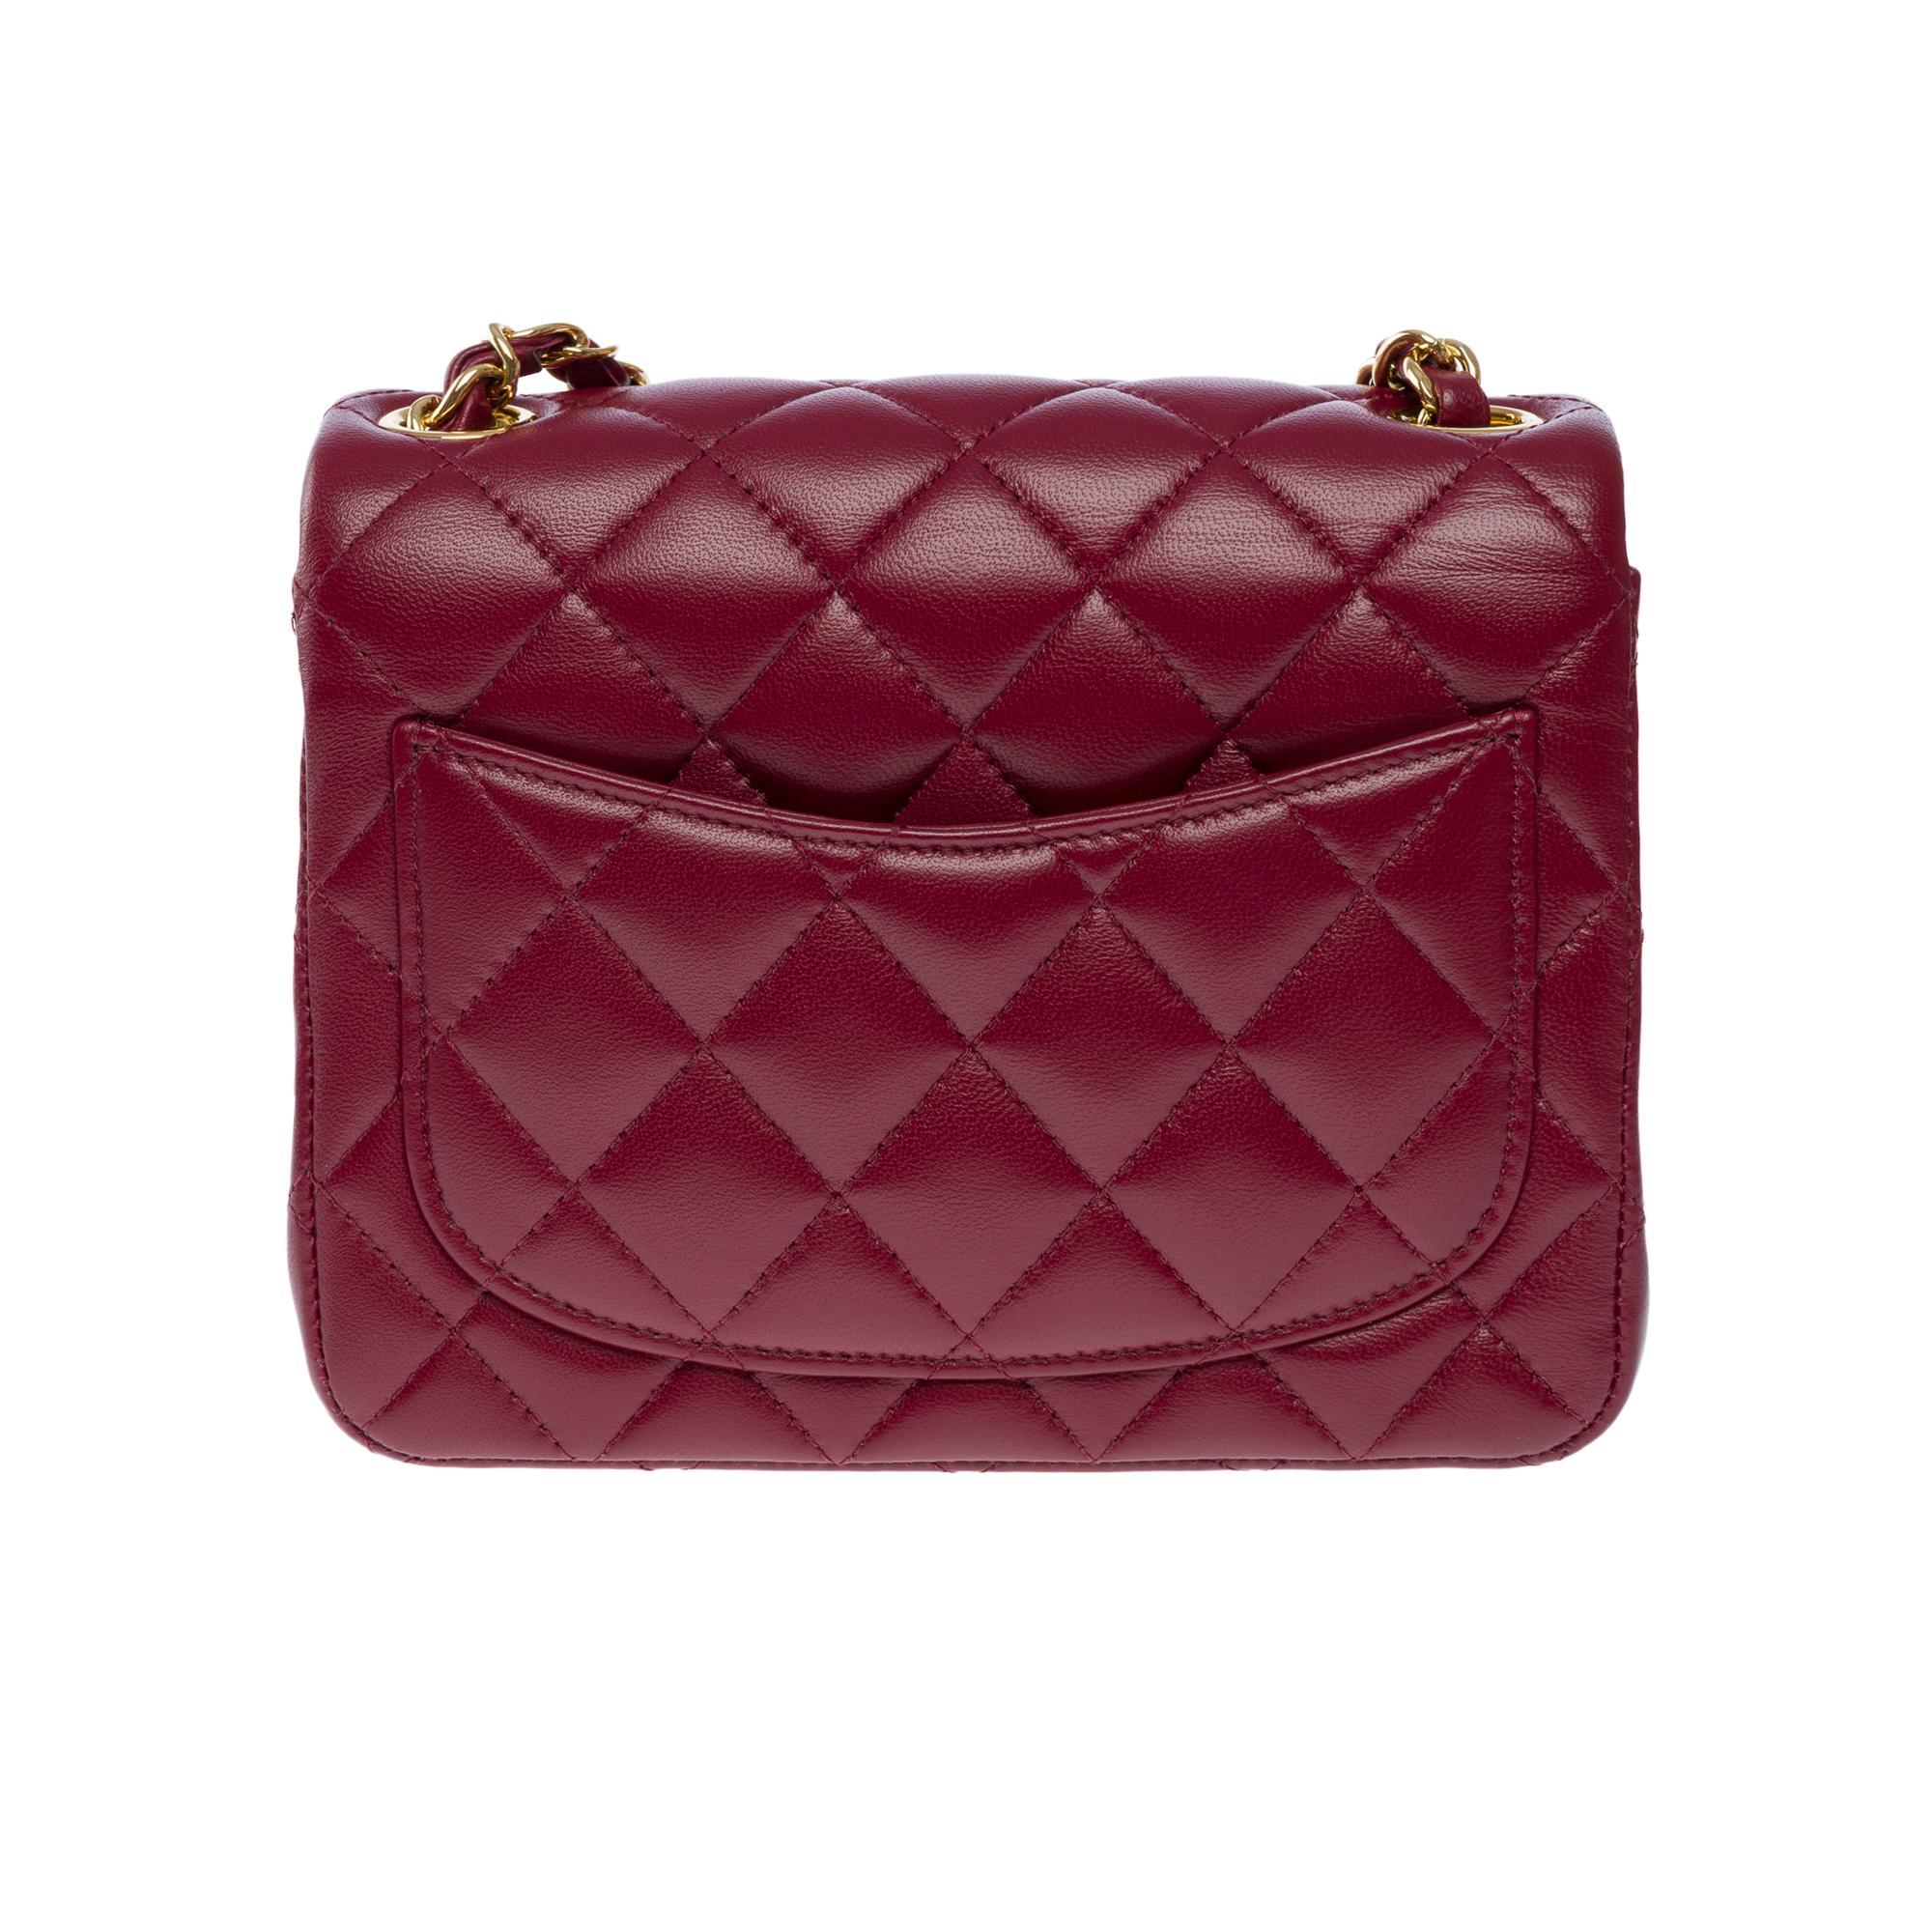 Women's Gorgeous Chanel Mini Timeless Shoulder flap bag in Plum quilted leather, GHW For Sale